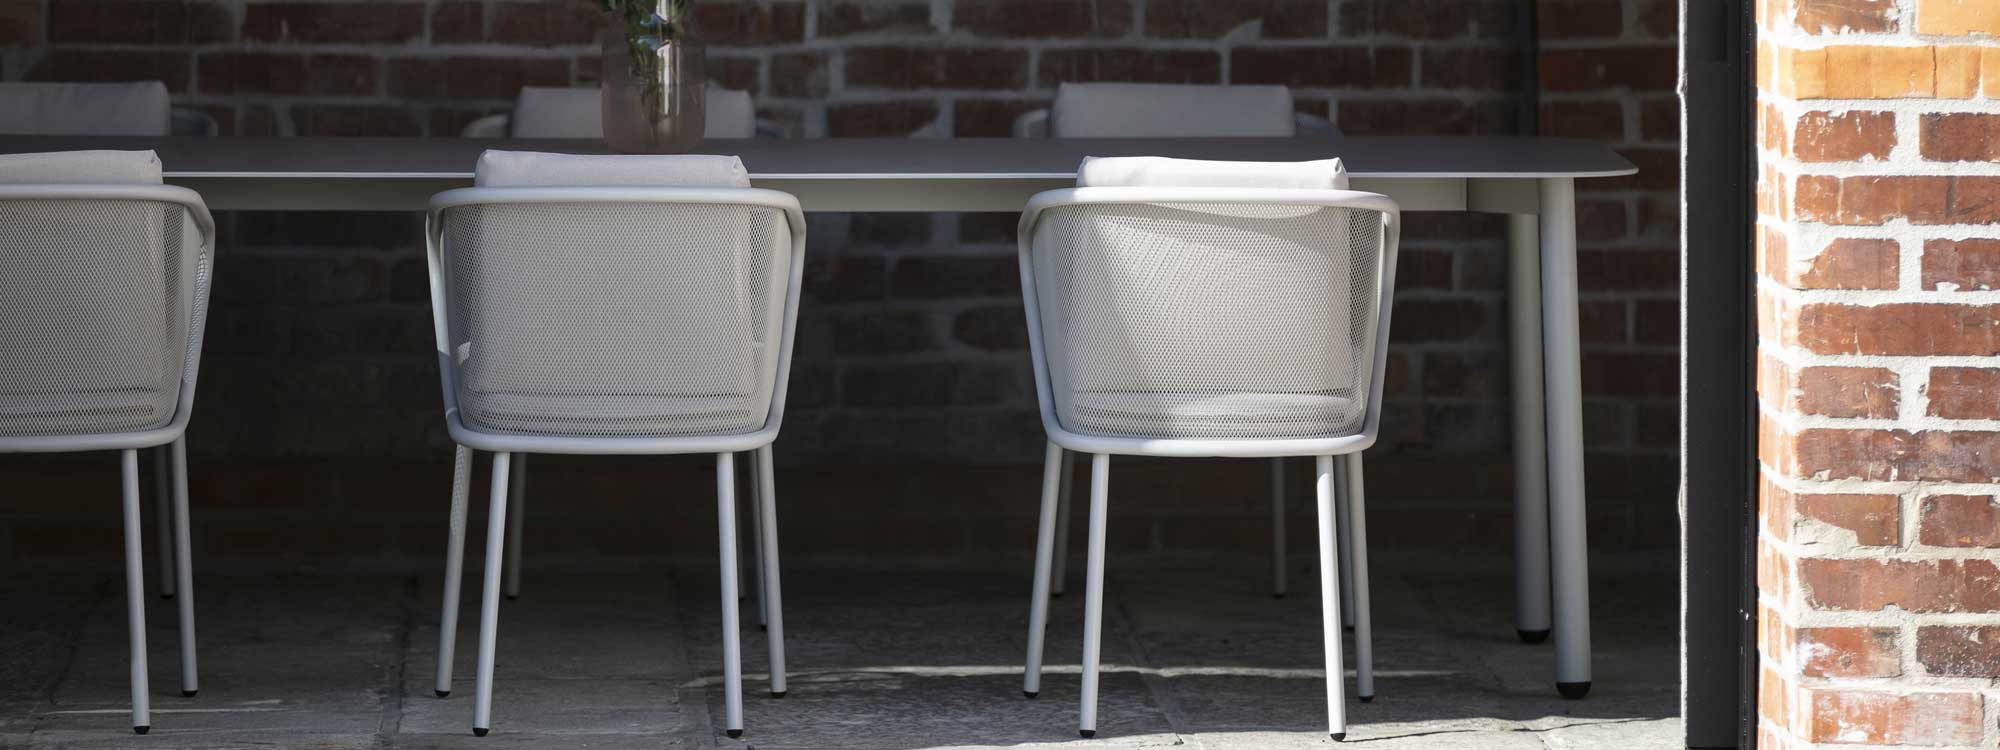 Image of detail of Condor garden chair's steel mesh back lends transparency to the furniture's design